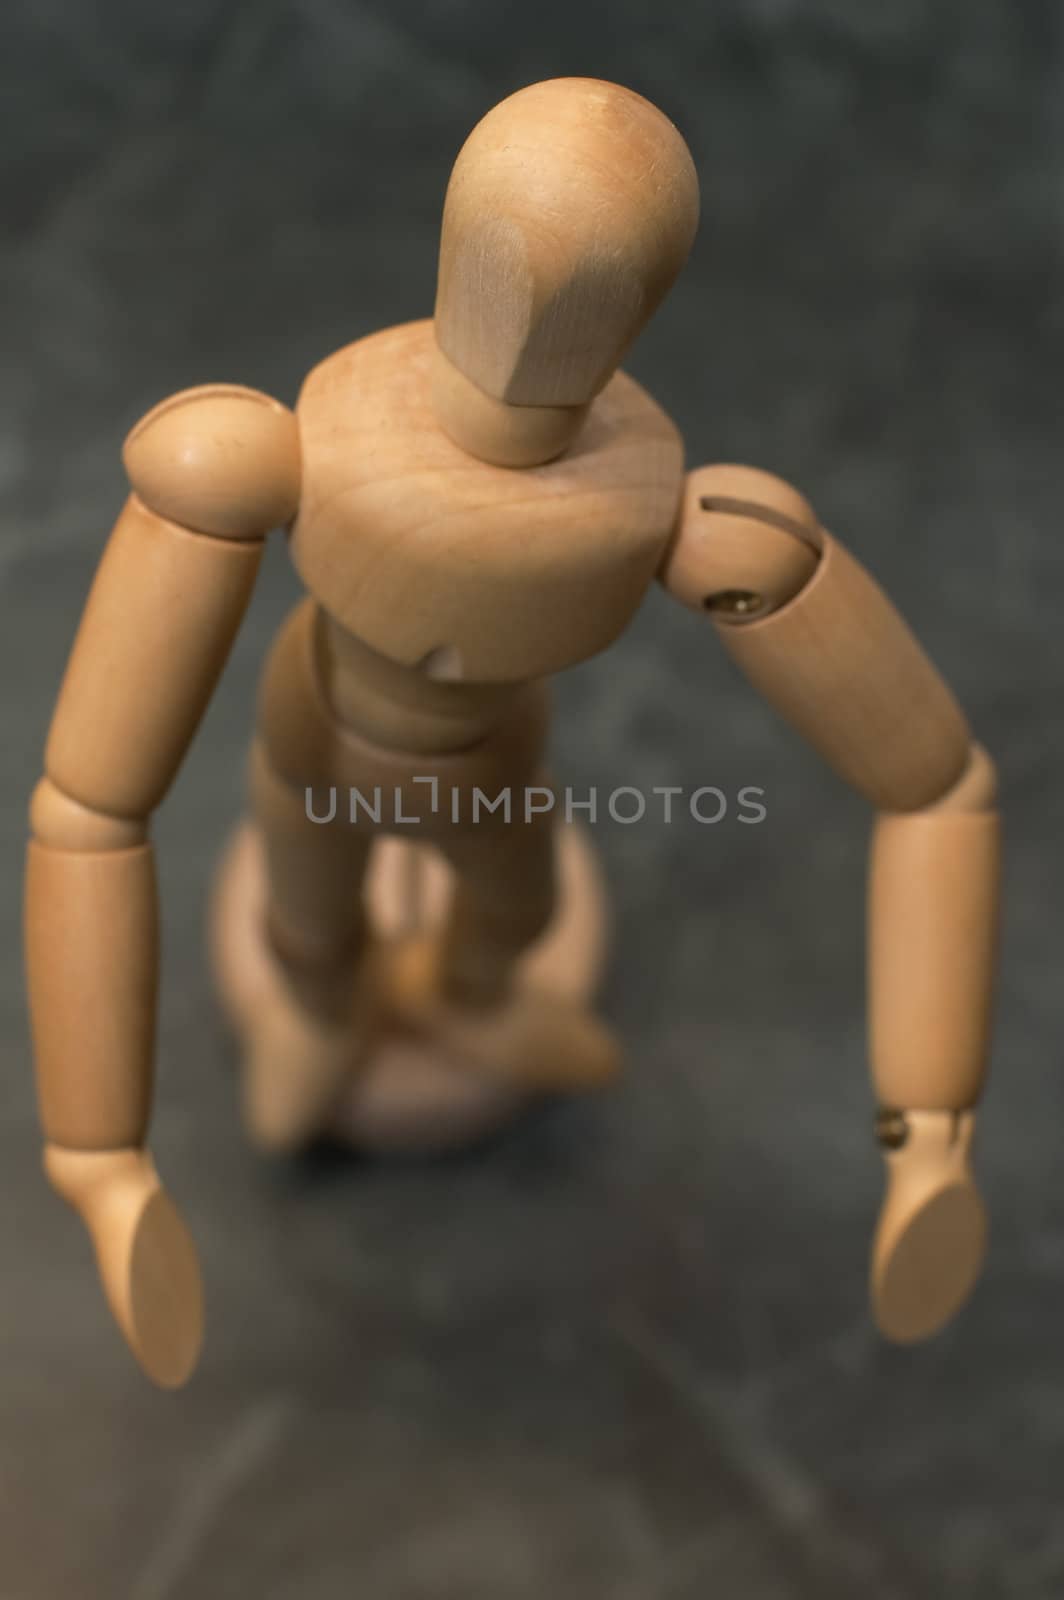 wooden toy figure looking curiously into camera, photo taken from above, shallow depth of view